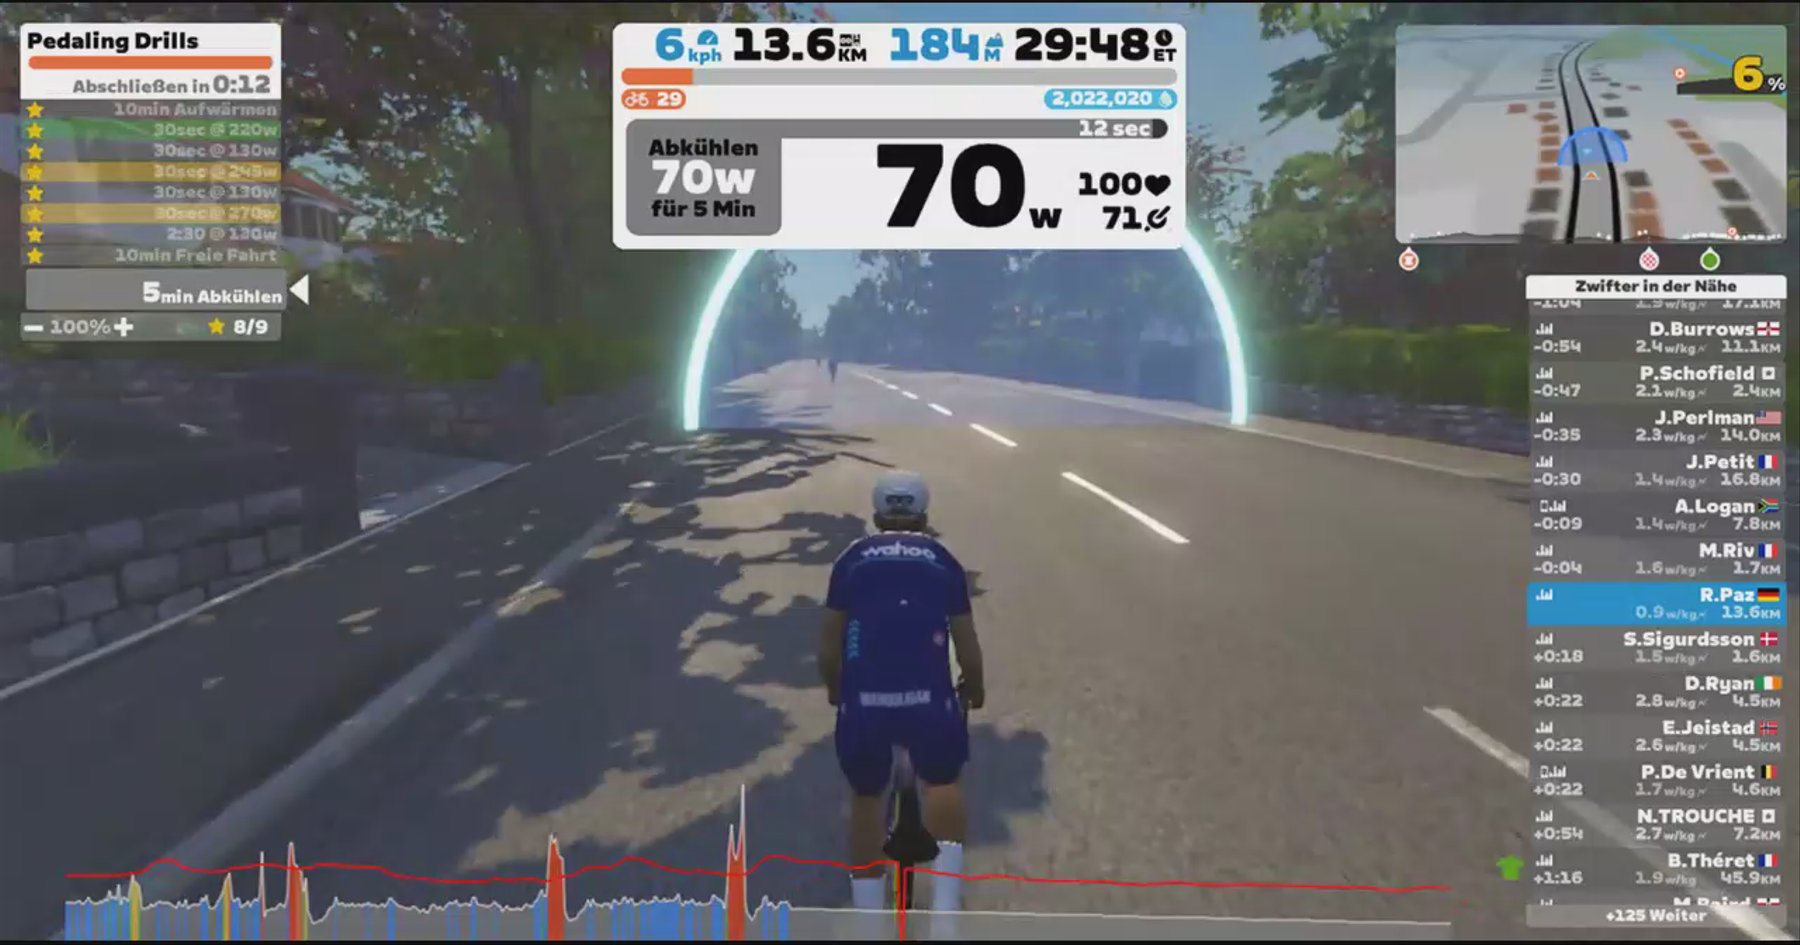 Zwift - Pedaling Drills in Yorkshire